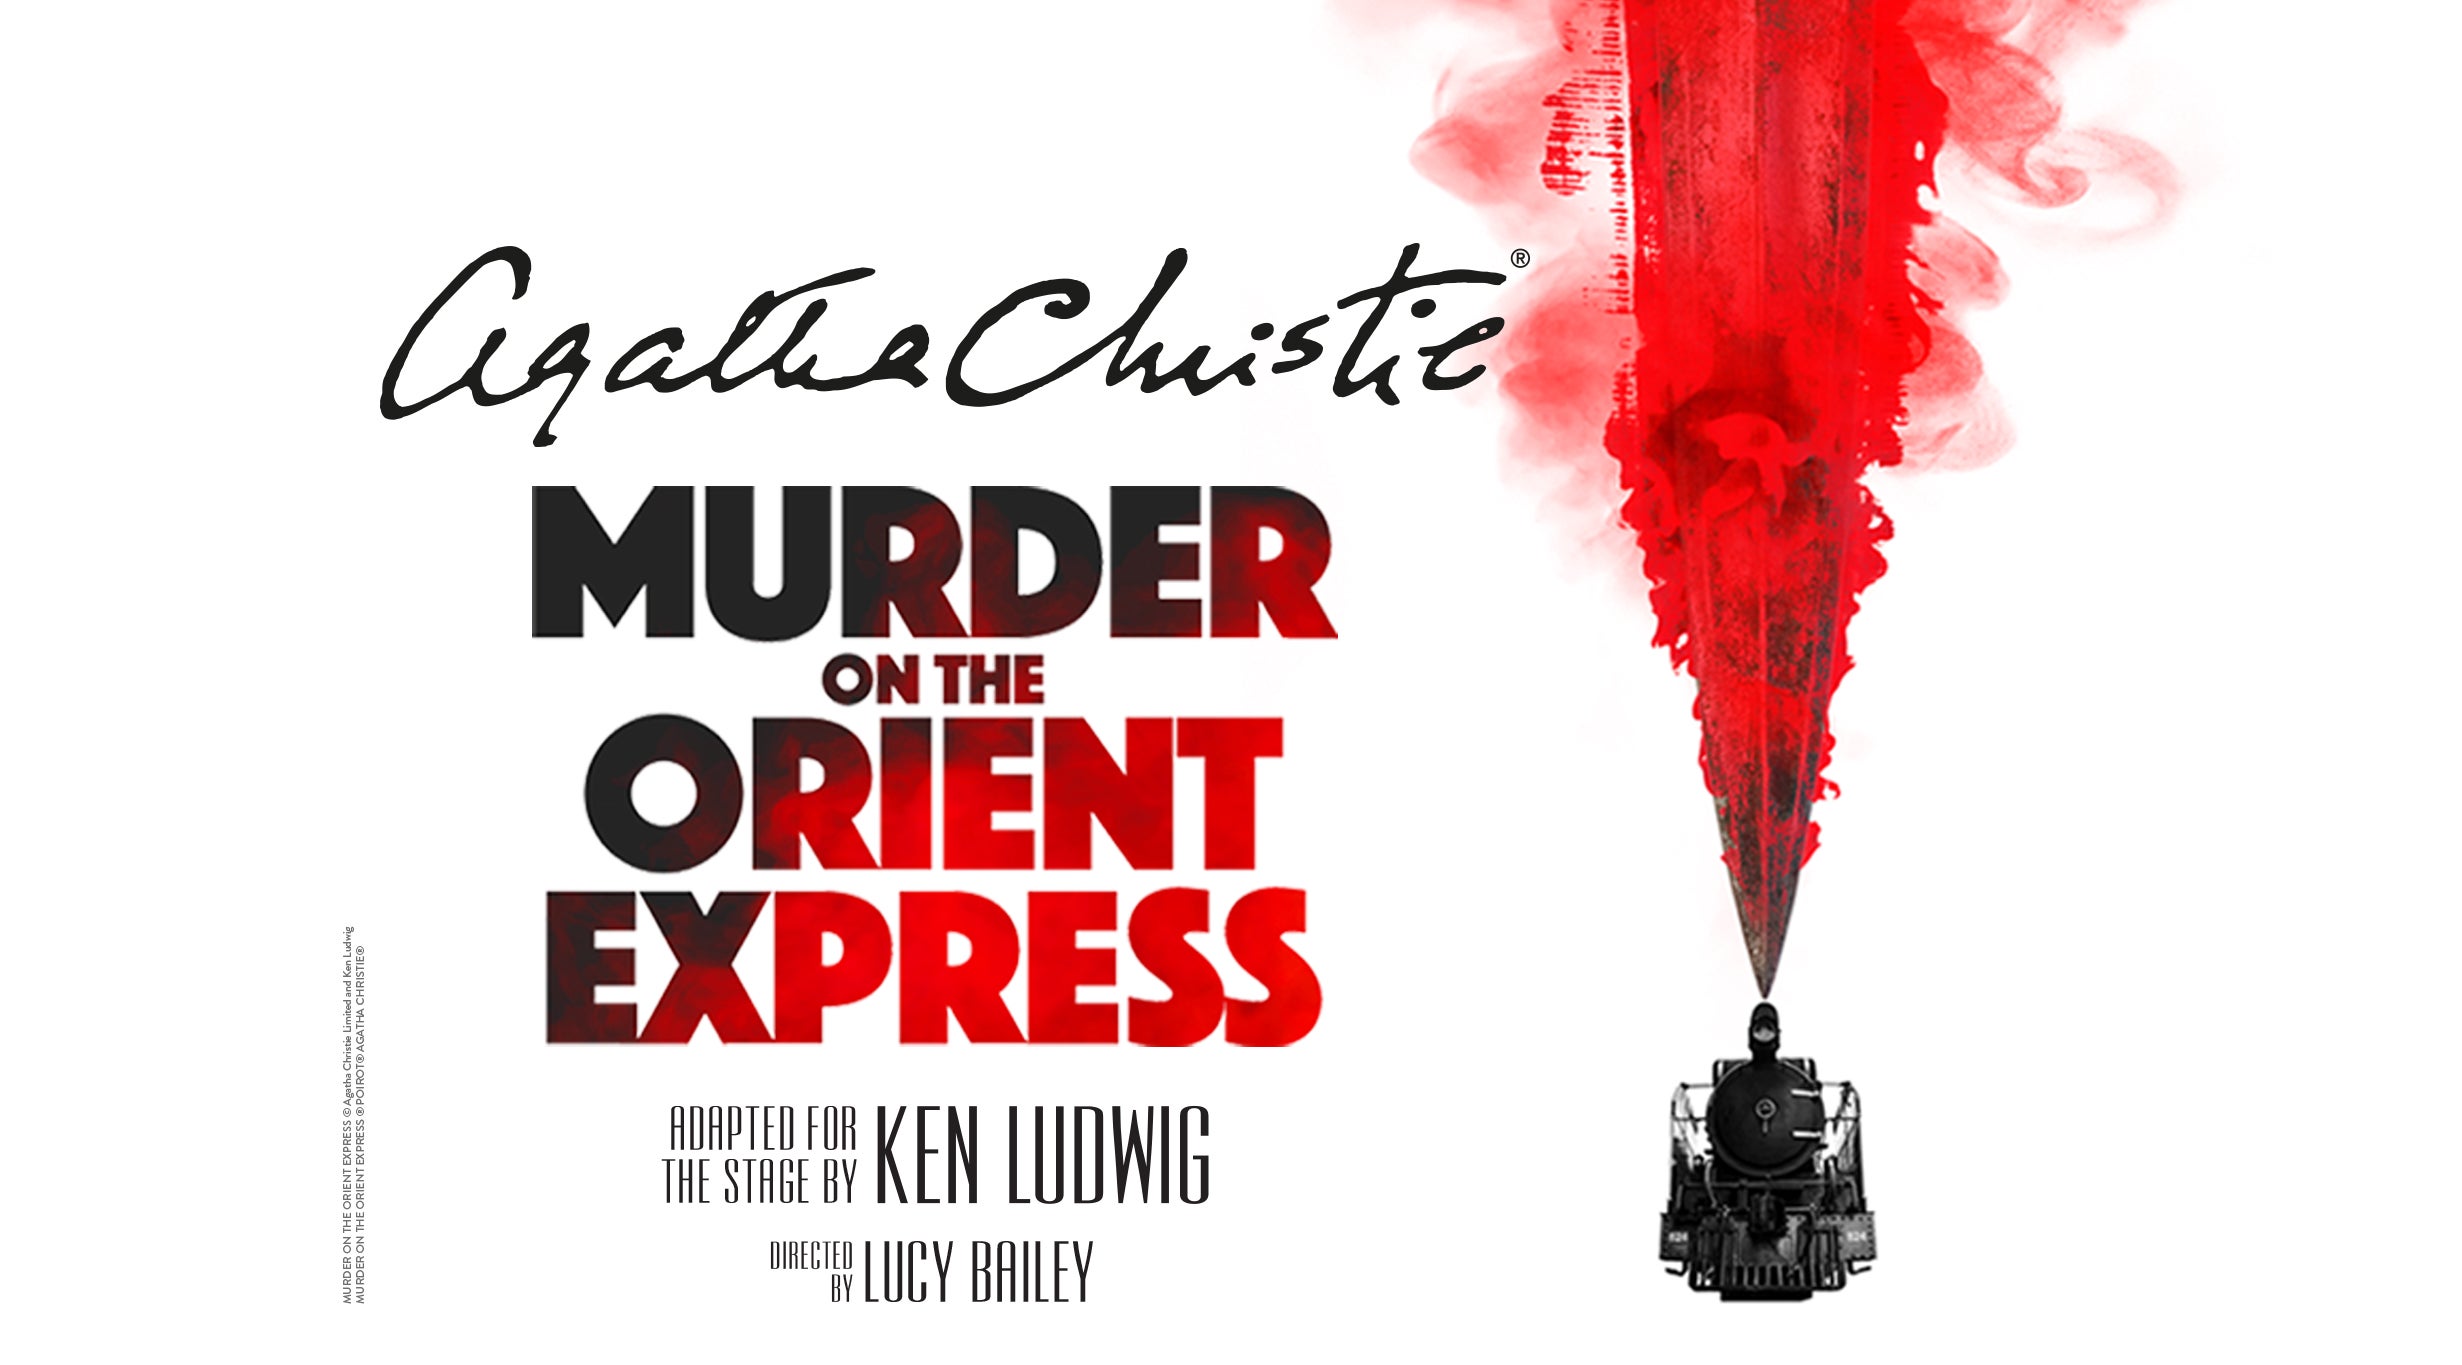 Murder On the Orient Express in Dublin promo photo for Venue presale offer code